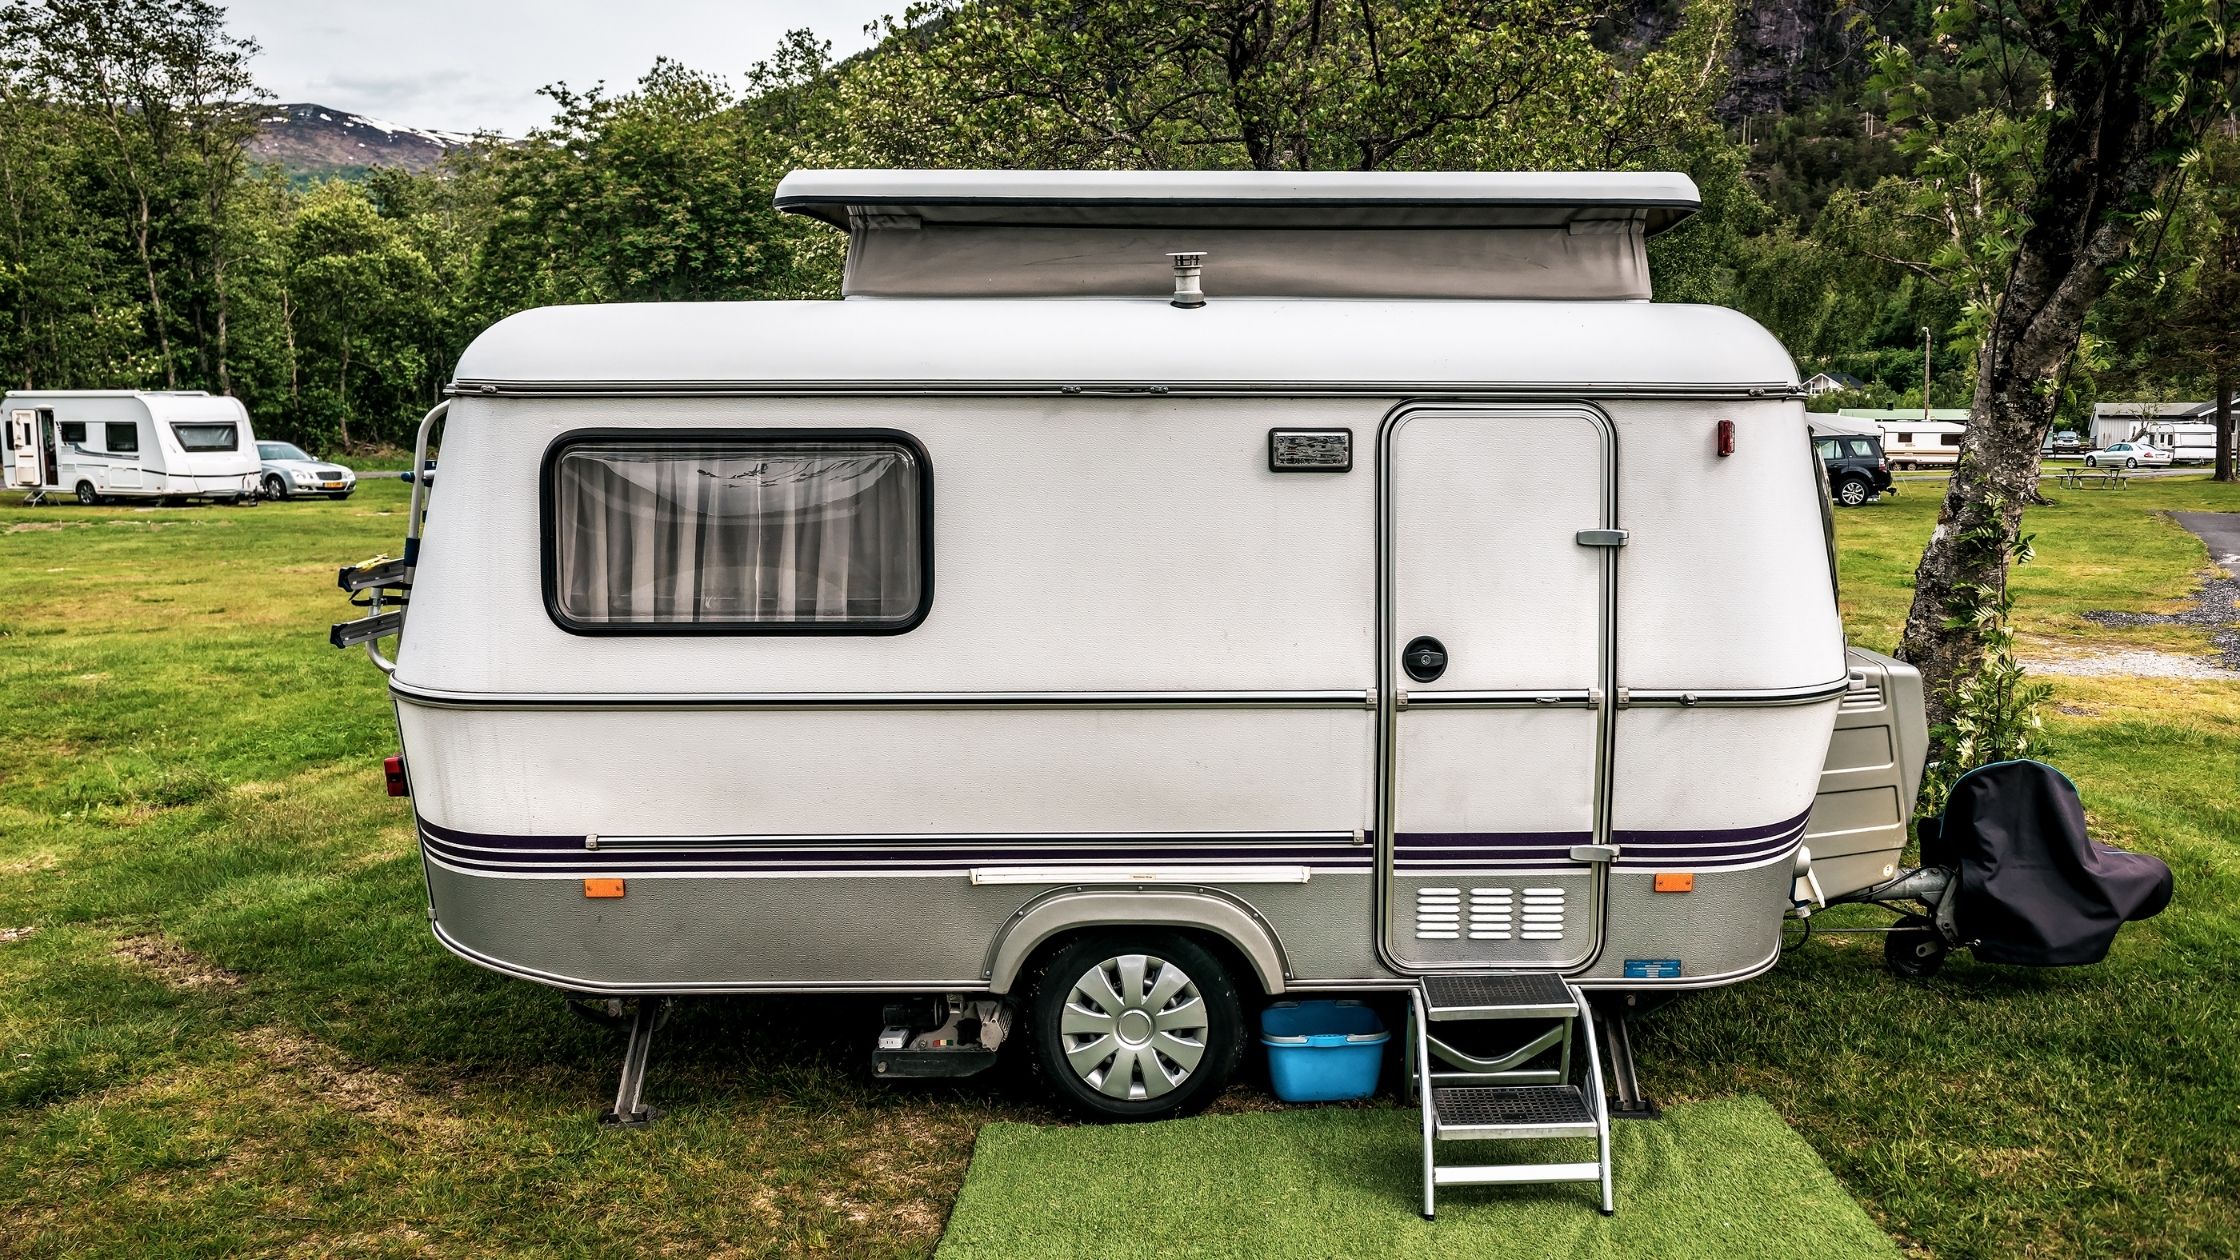 How Much Do Camping Trailers Weigh?